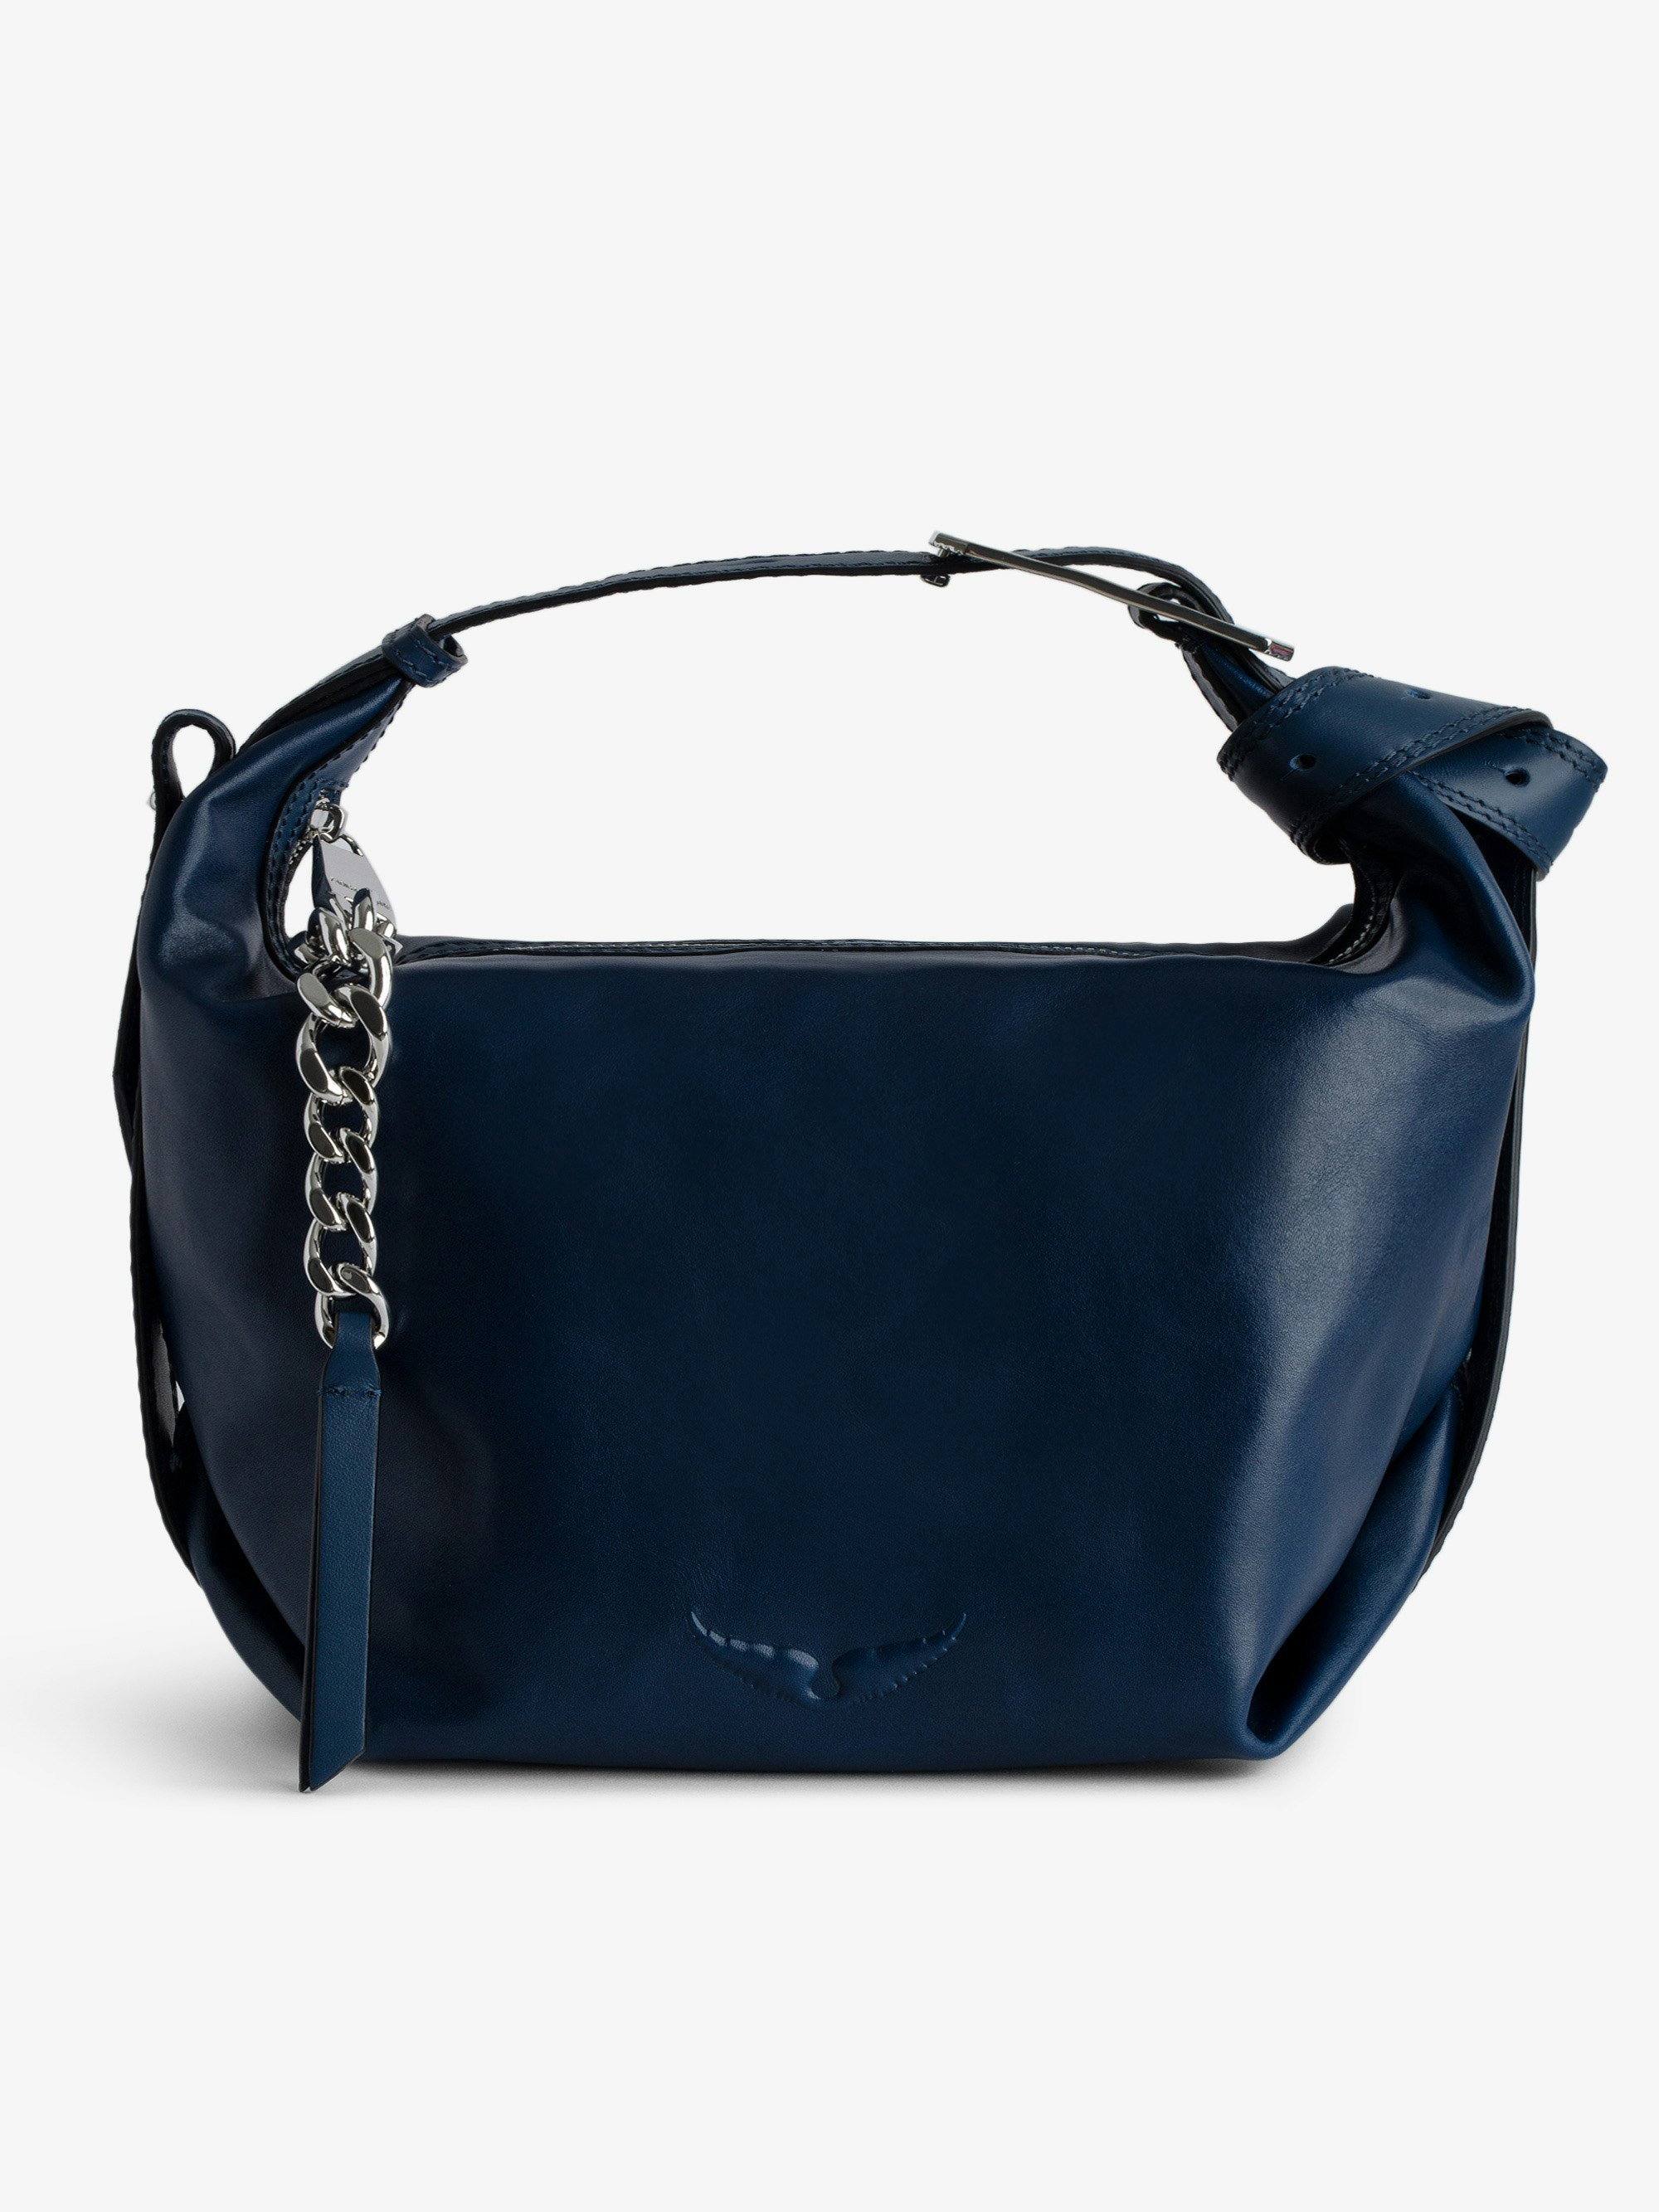 Le Cecilia Bag - Blue Italian vegetable-tanned leather bag with leather shoulder strap and metallic C buckle.